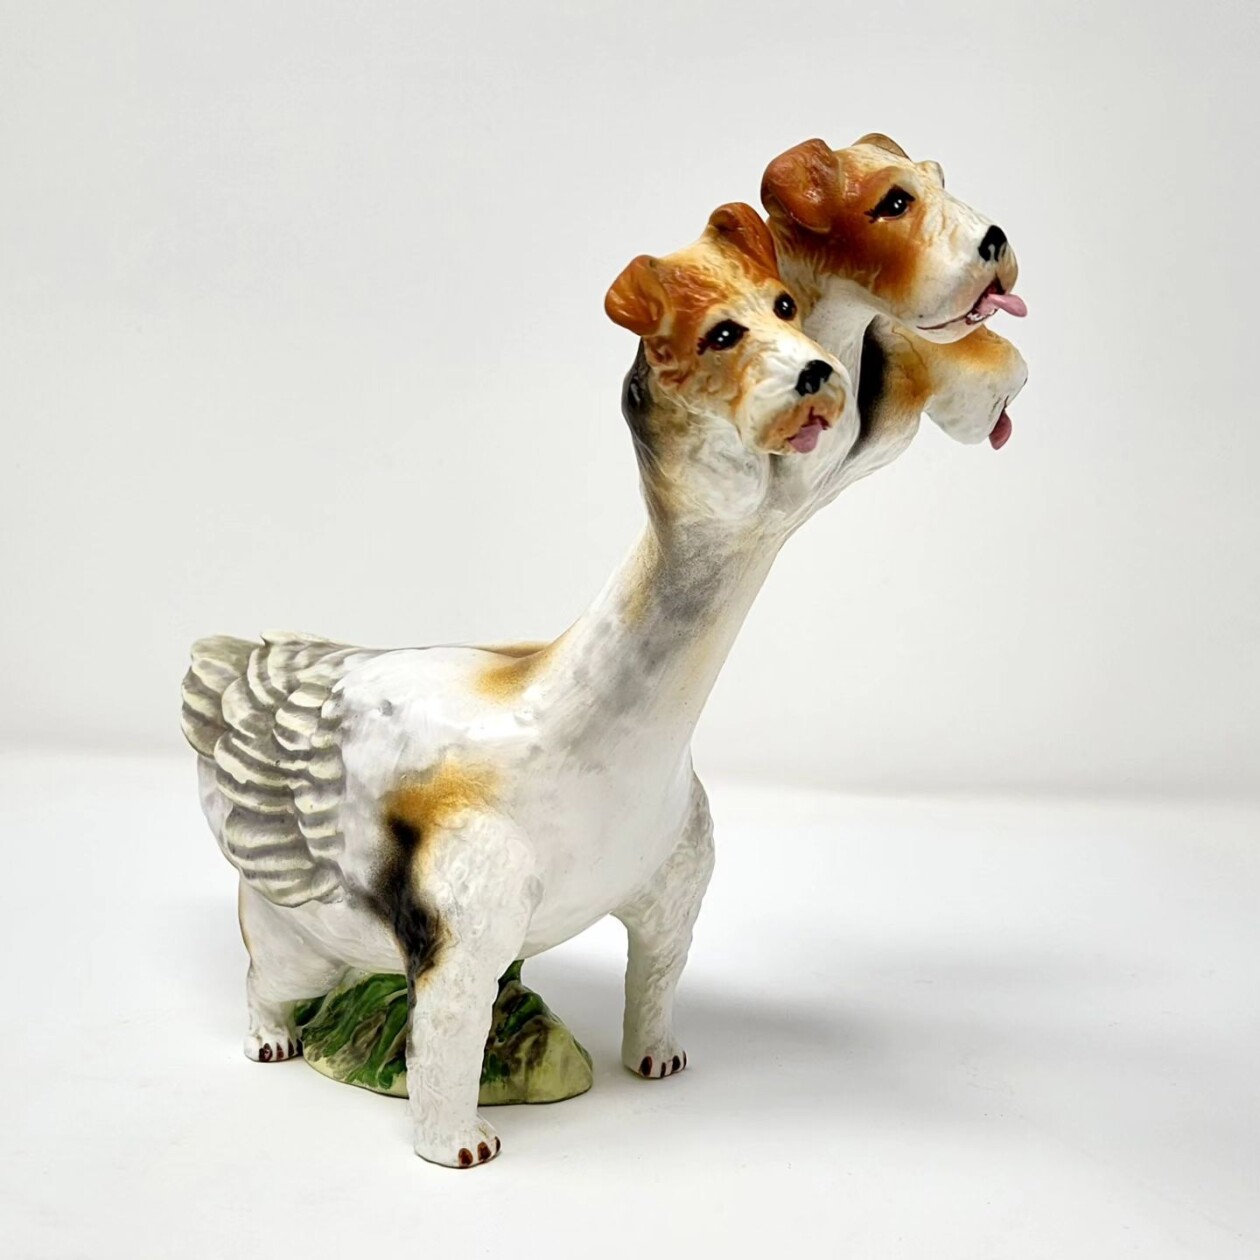 Debra Broz Brings To Life Uncanny Beings By Creating Unexpected Mashups Between Animals, Plants, And Humans (6)